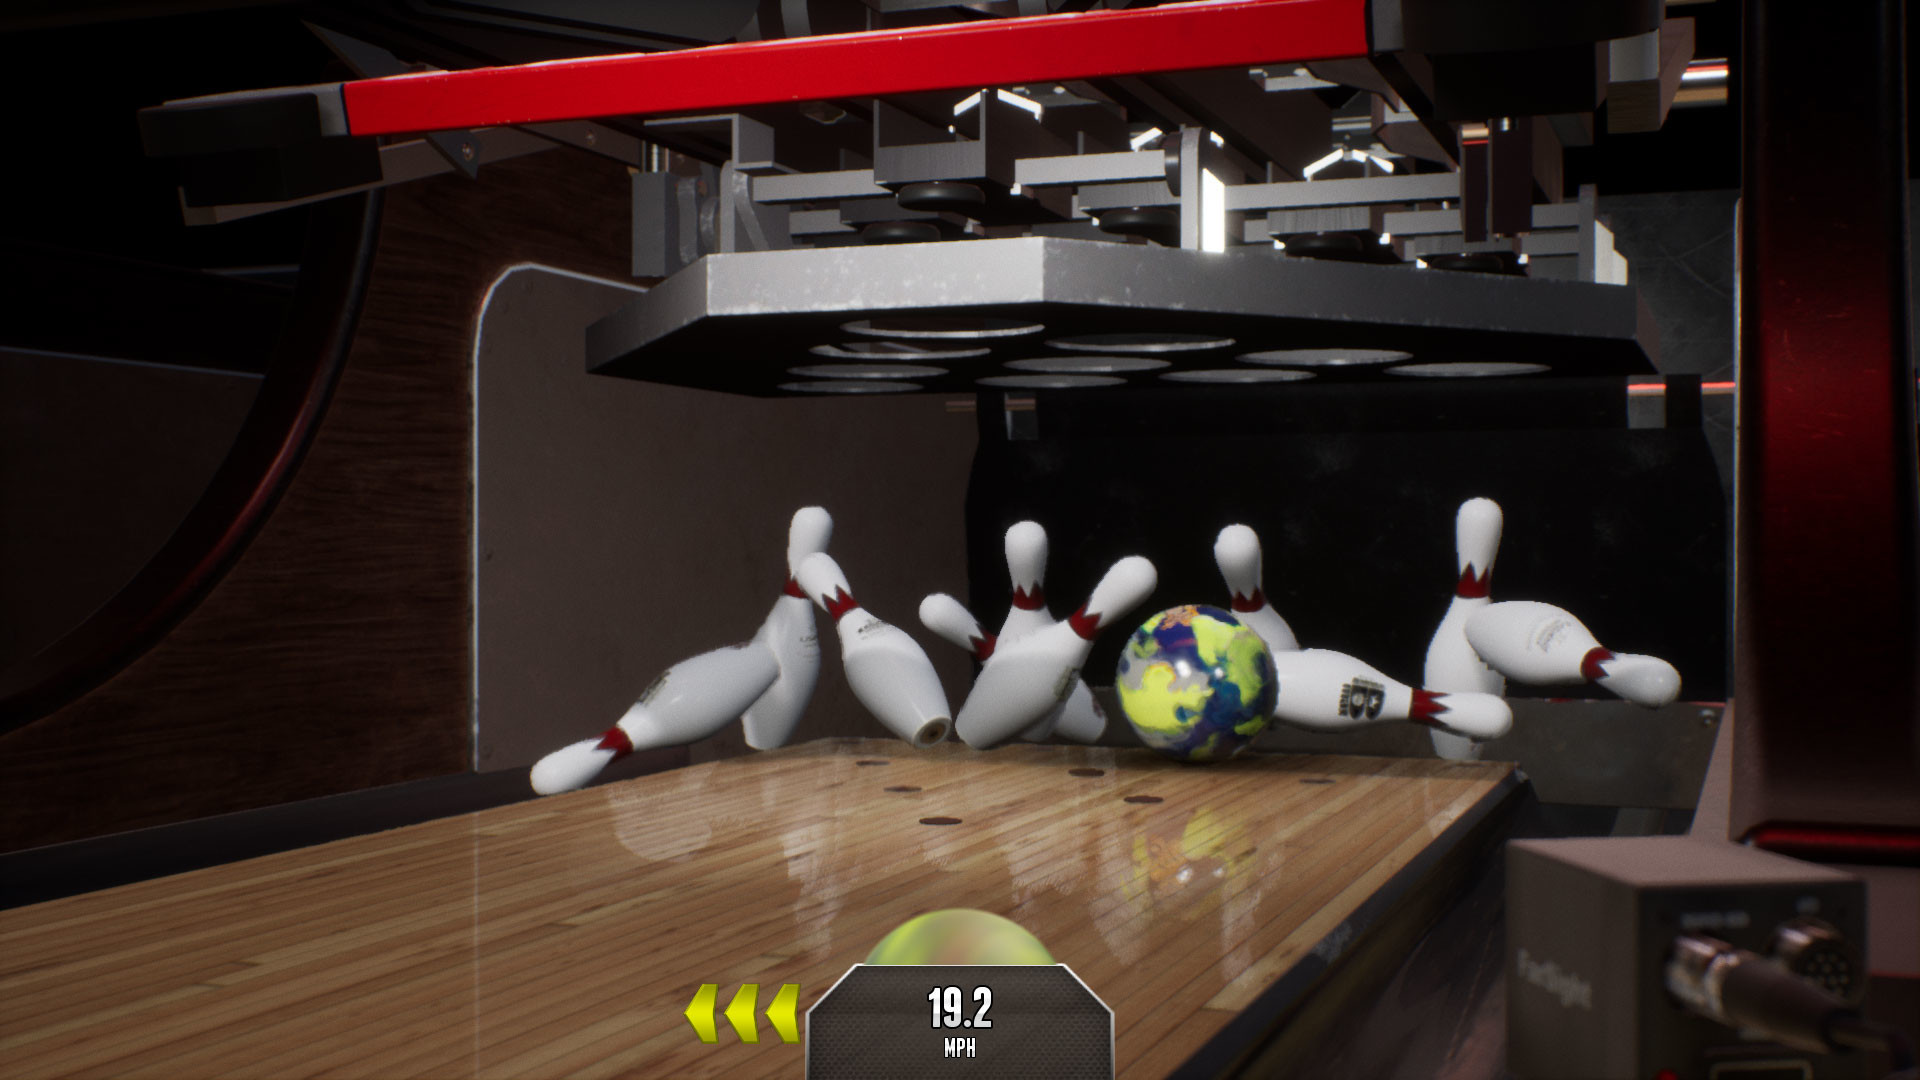 Pba Pro Bowling On Steam - how to get into the secret bowling alley for free experience roblox shopping simulator